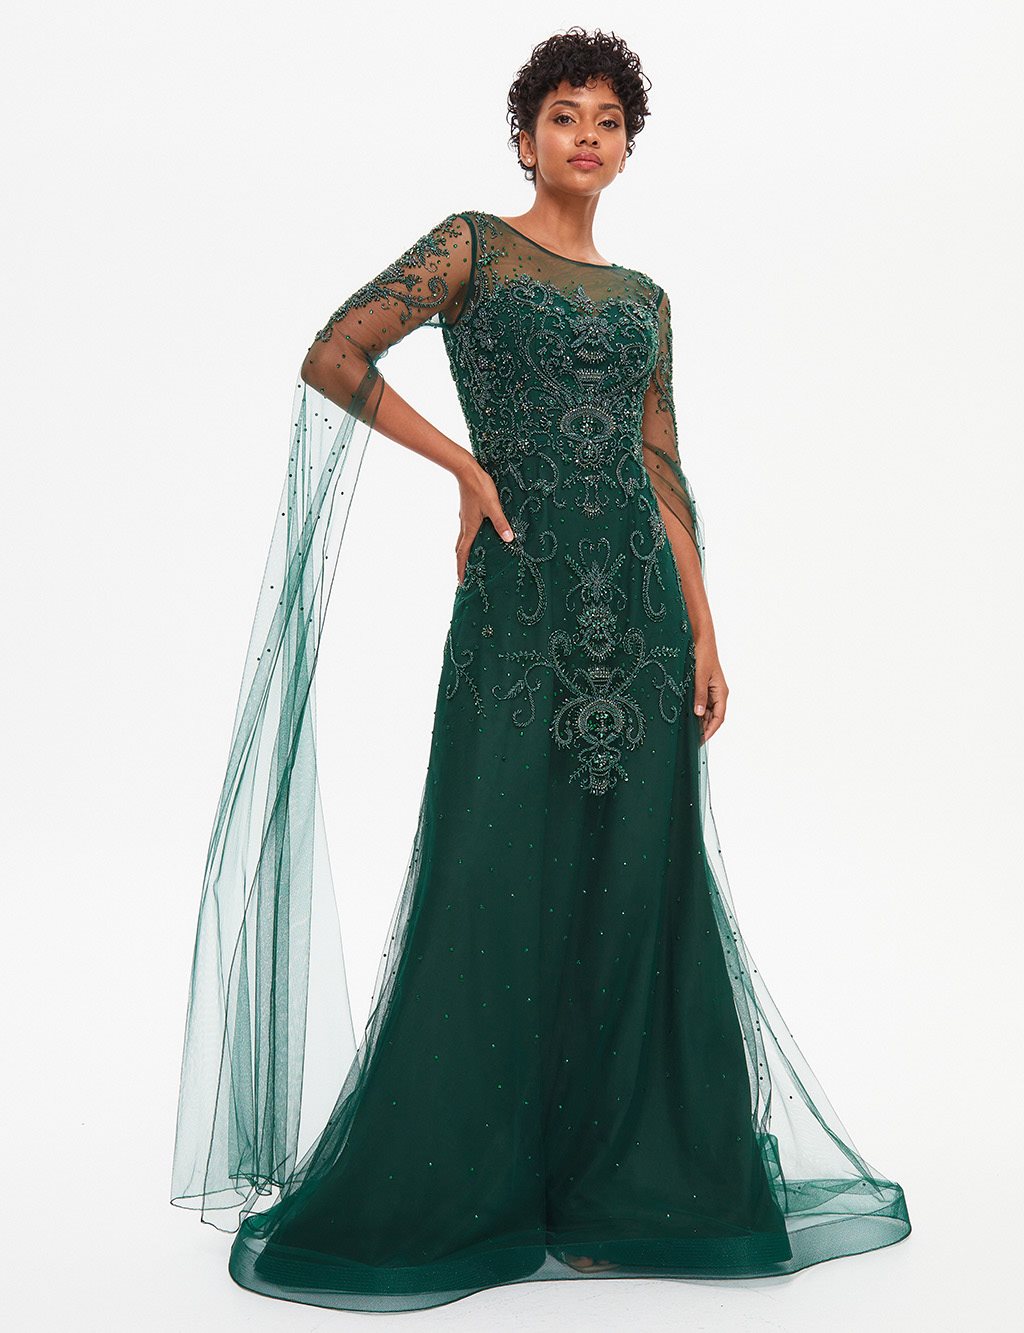 TIARA Tulle Covered Embroidered Evening Dress Emerald